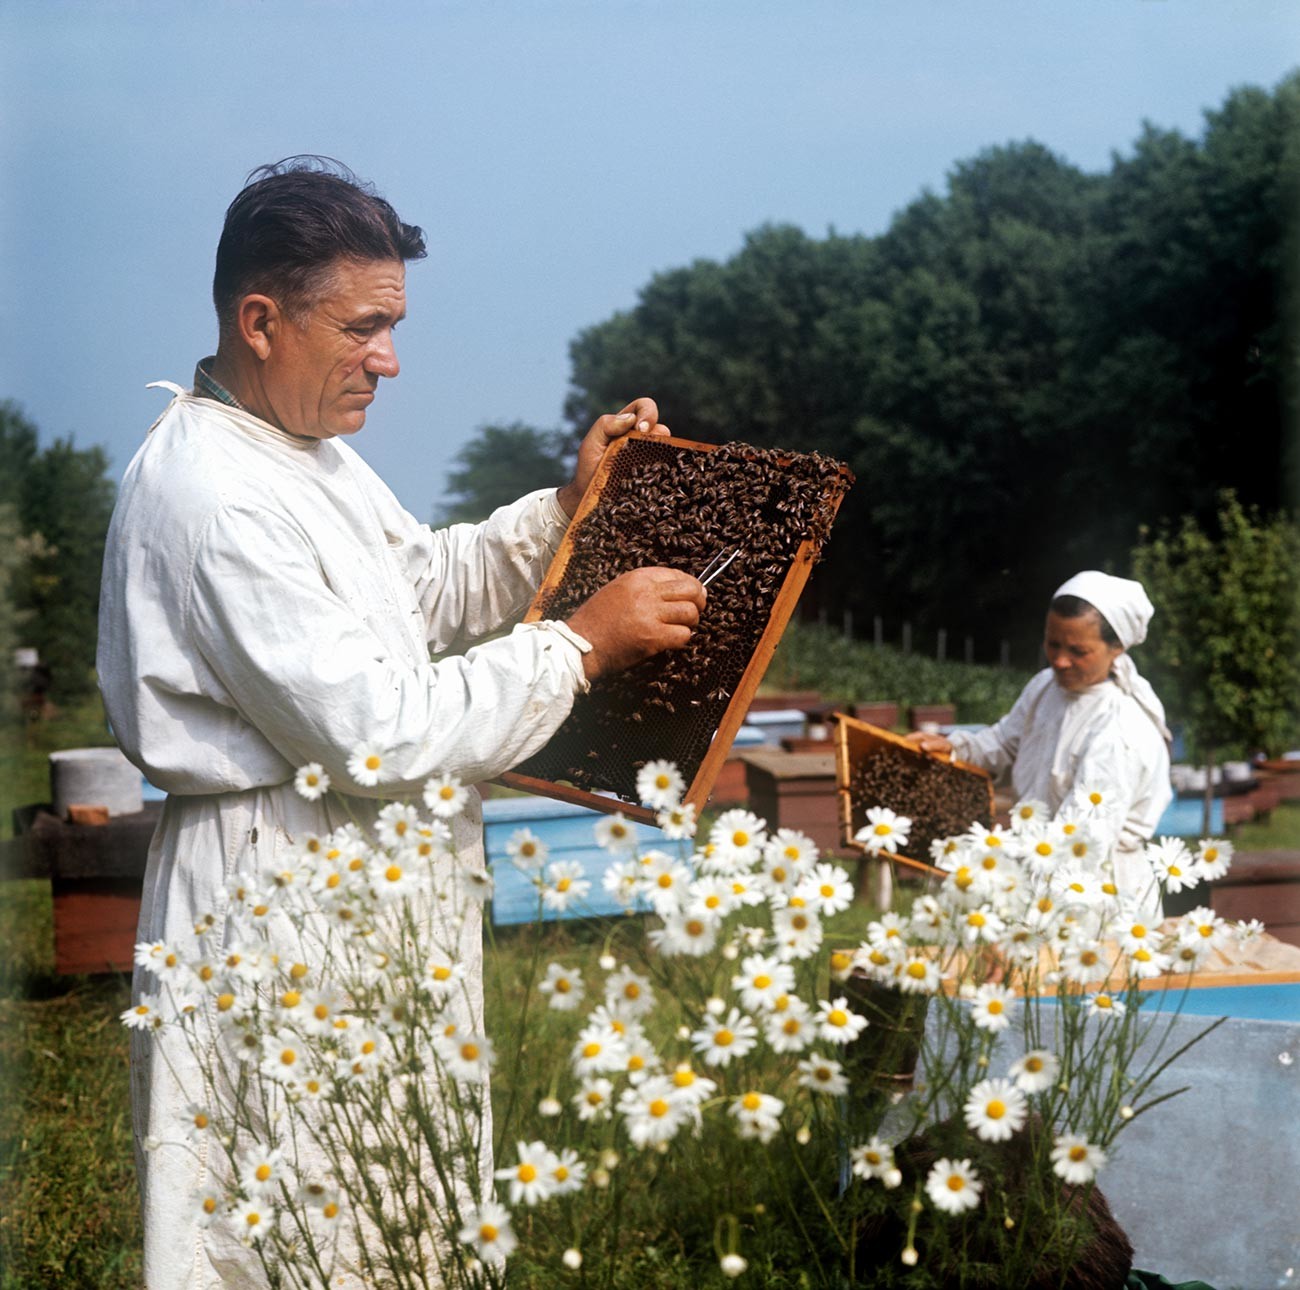 Beekeeper Anton Lupulchuk in an apiary at the Mayak collective farm in the Dondyushansky district. Moldavian SSR, 1975